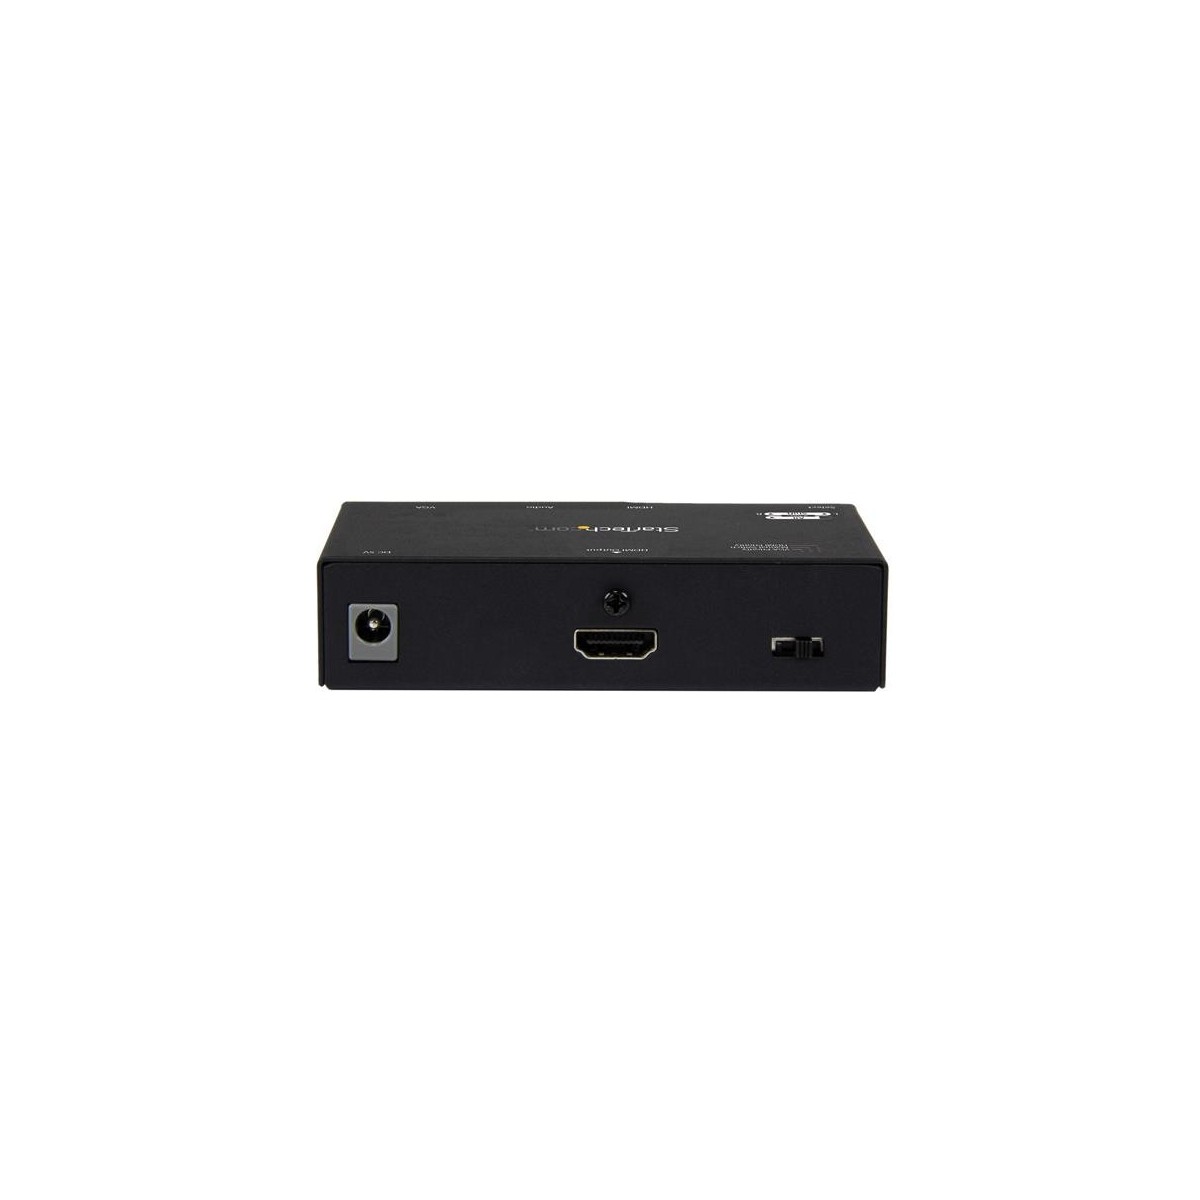 StarTech.com 2x1 HDMI + VGA to HDMI Converter Switch w/ Automatic and Priority Switching – 1080p - HDMI/VGA - Black - 1920 x 108